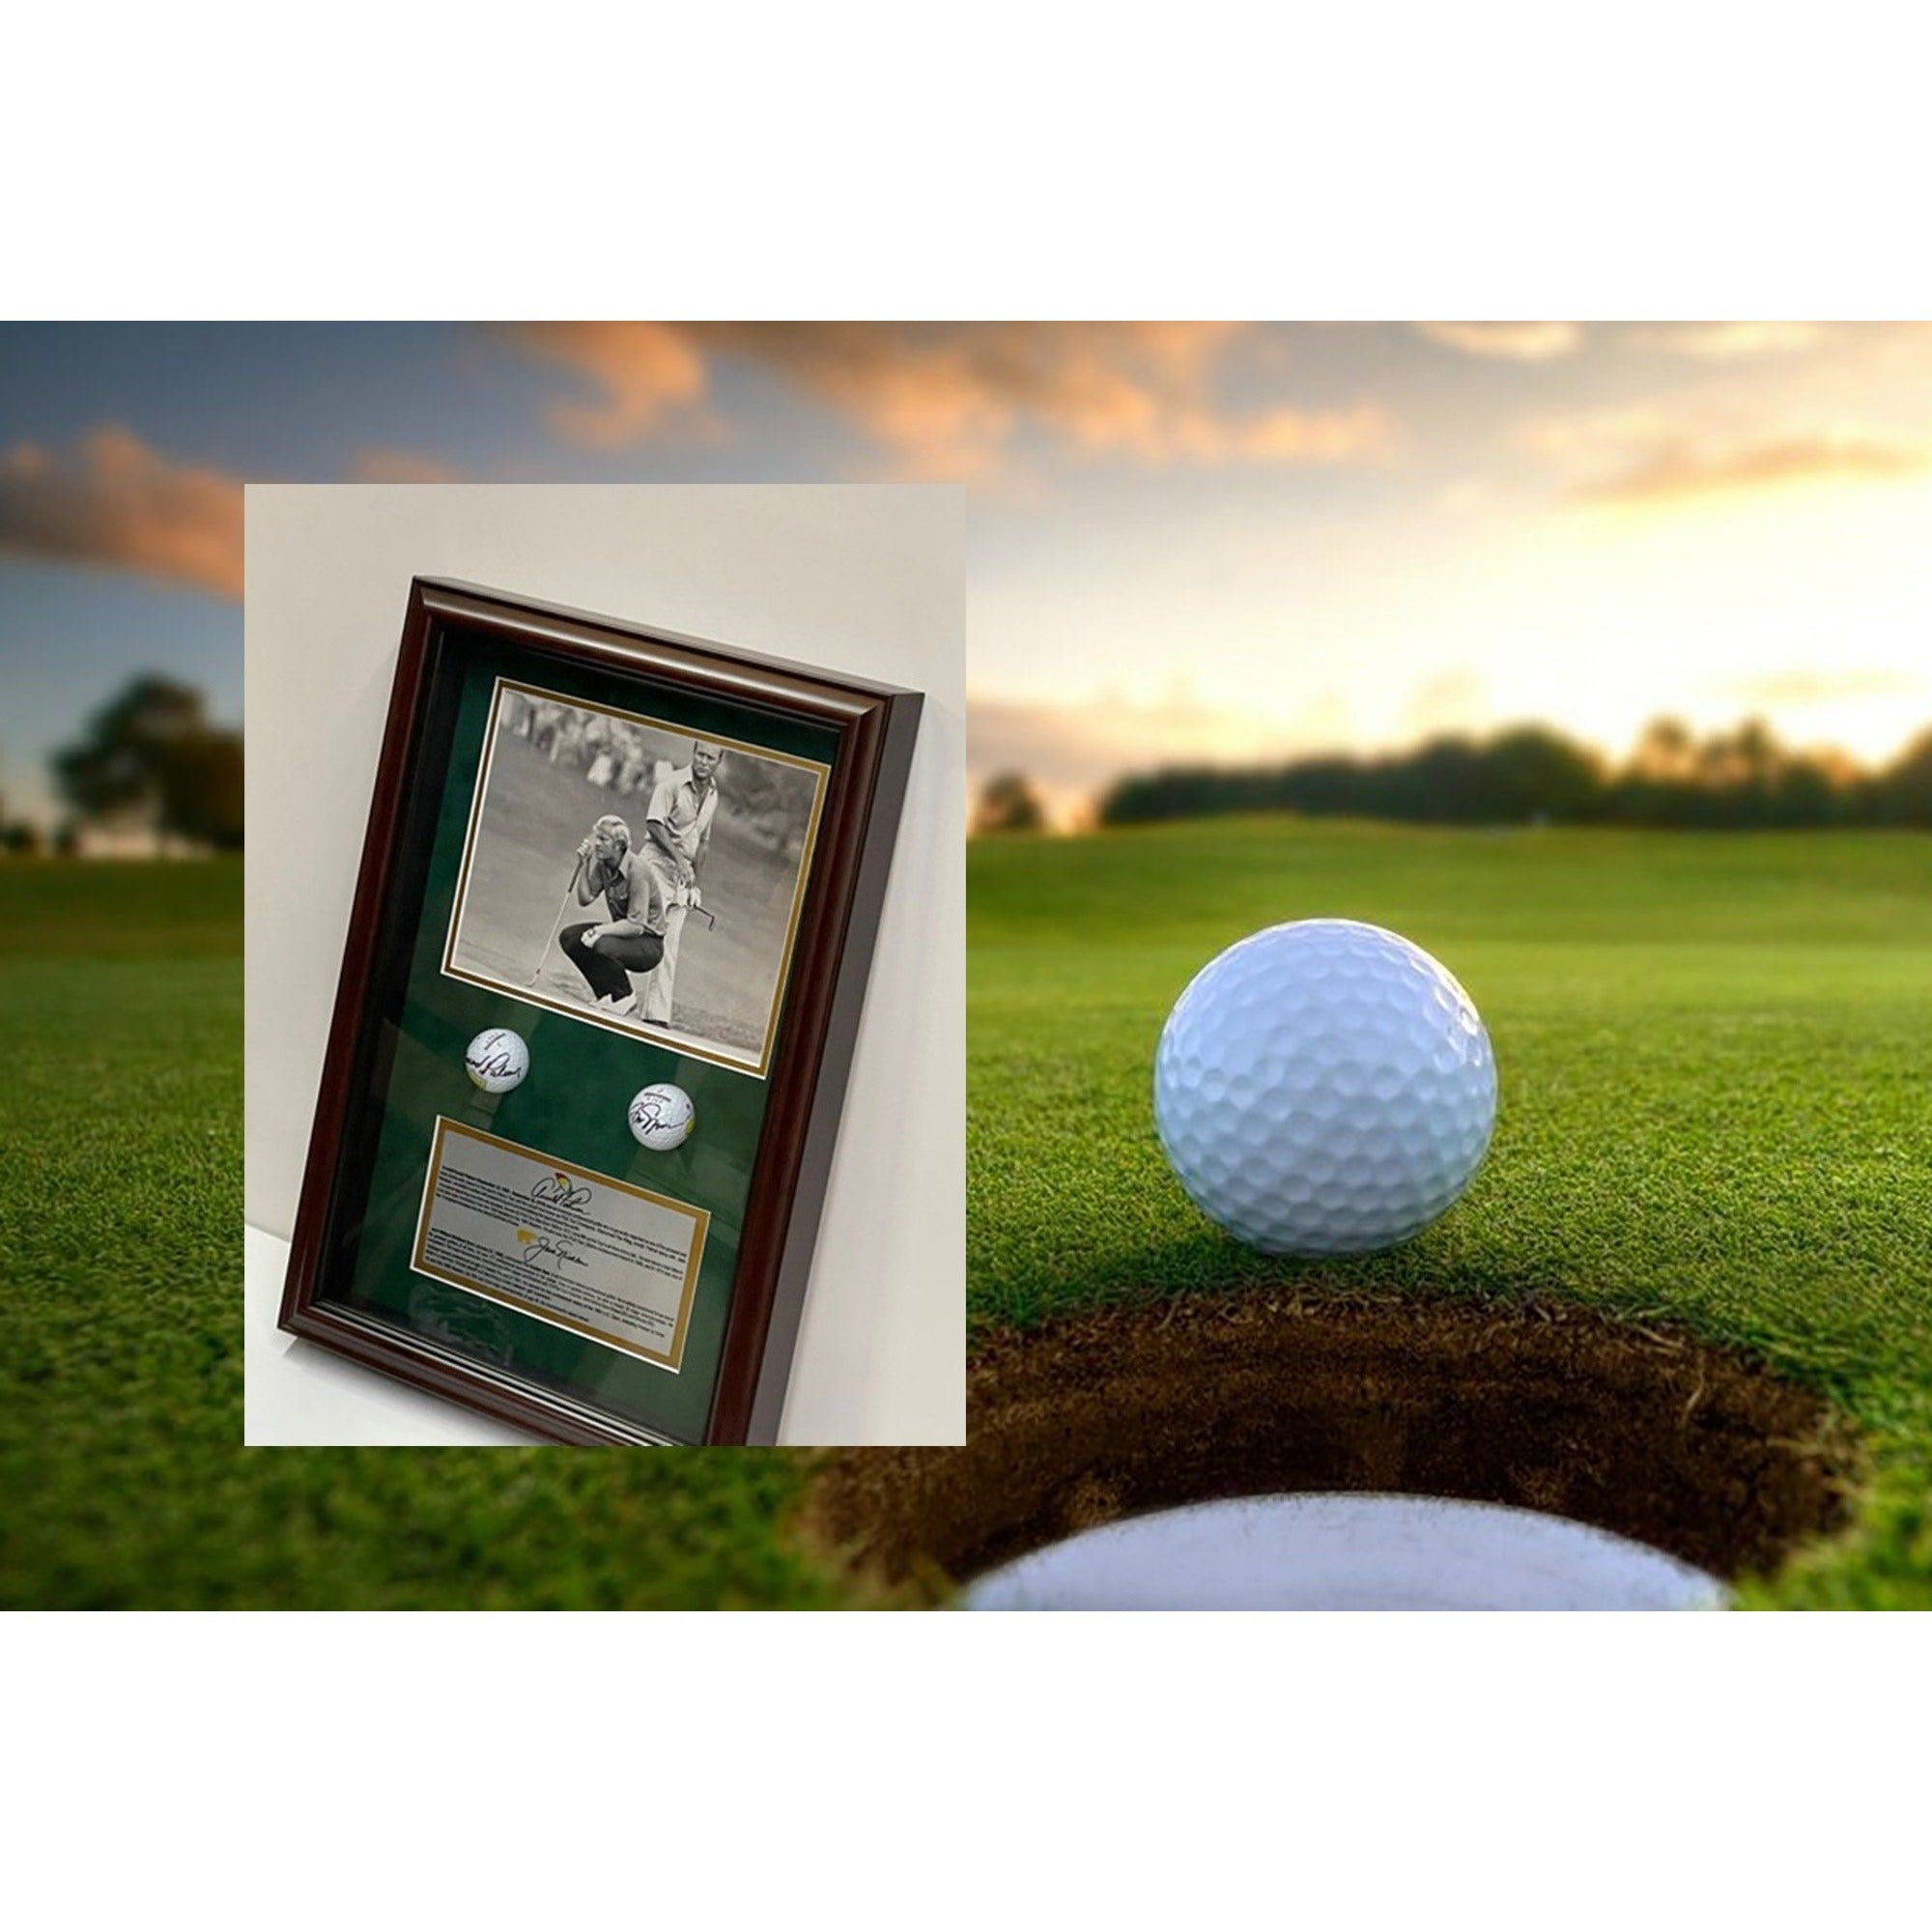 Jack Nicklaus and Arnold Palmer signed and framed with proof